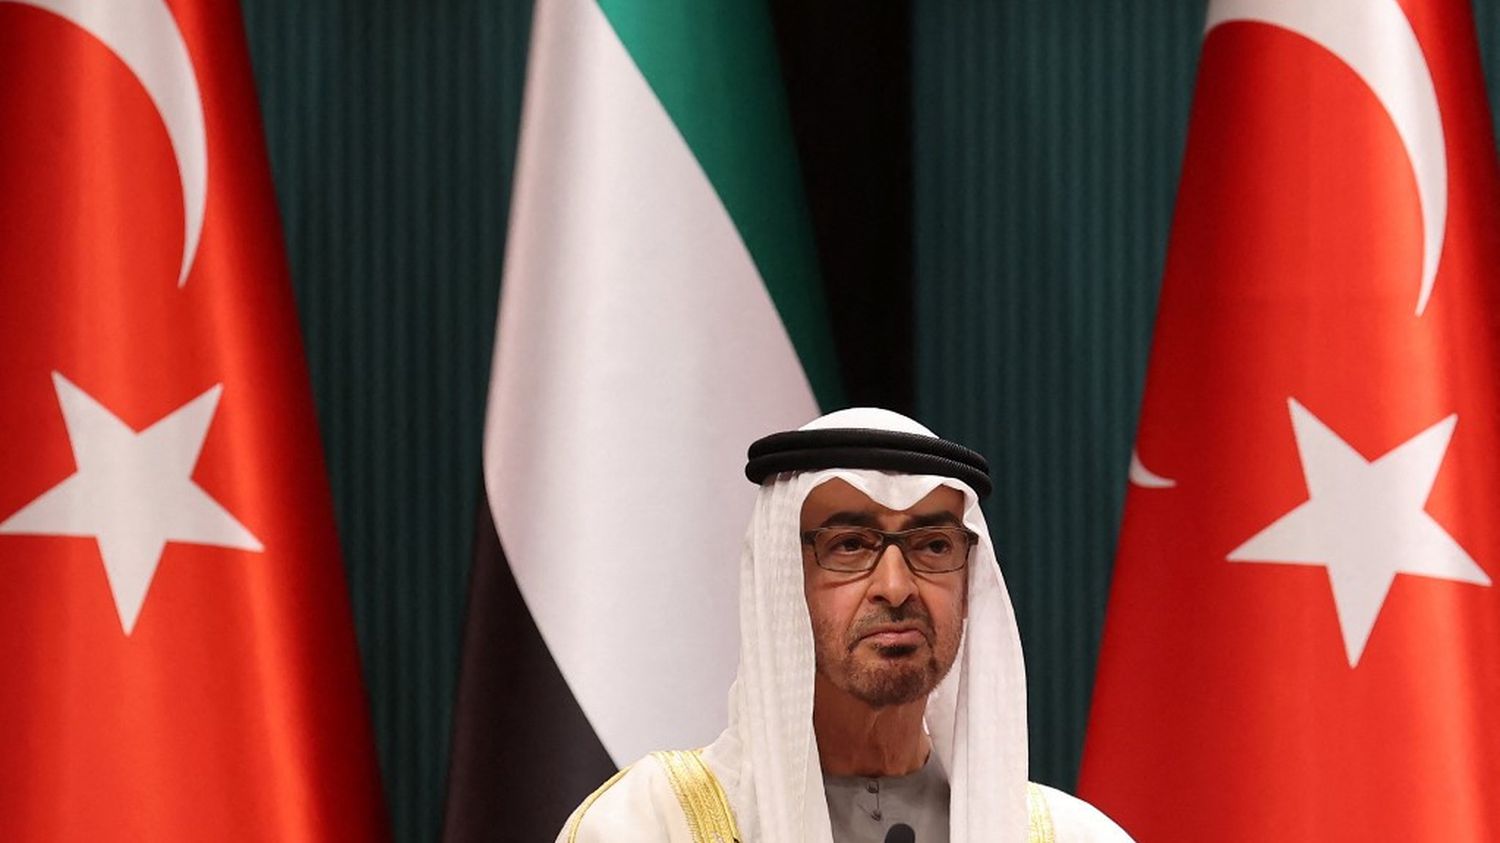 Mohammed bin Zayed elected president of the United Arab Emirates by a Supreme Council
